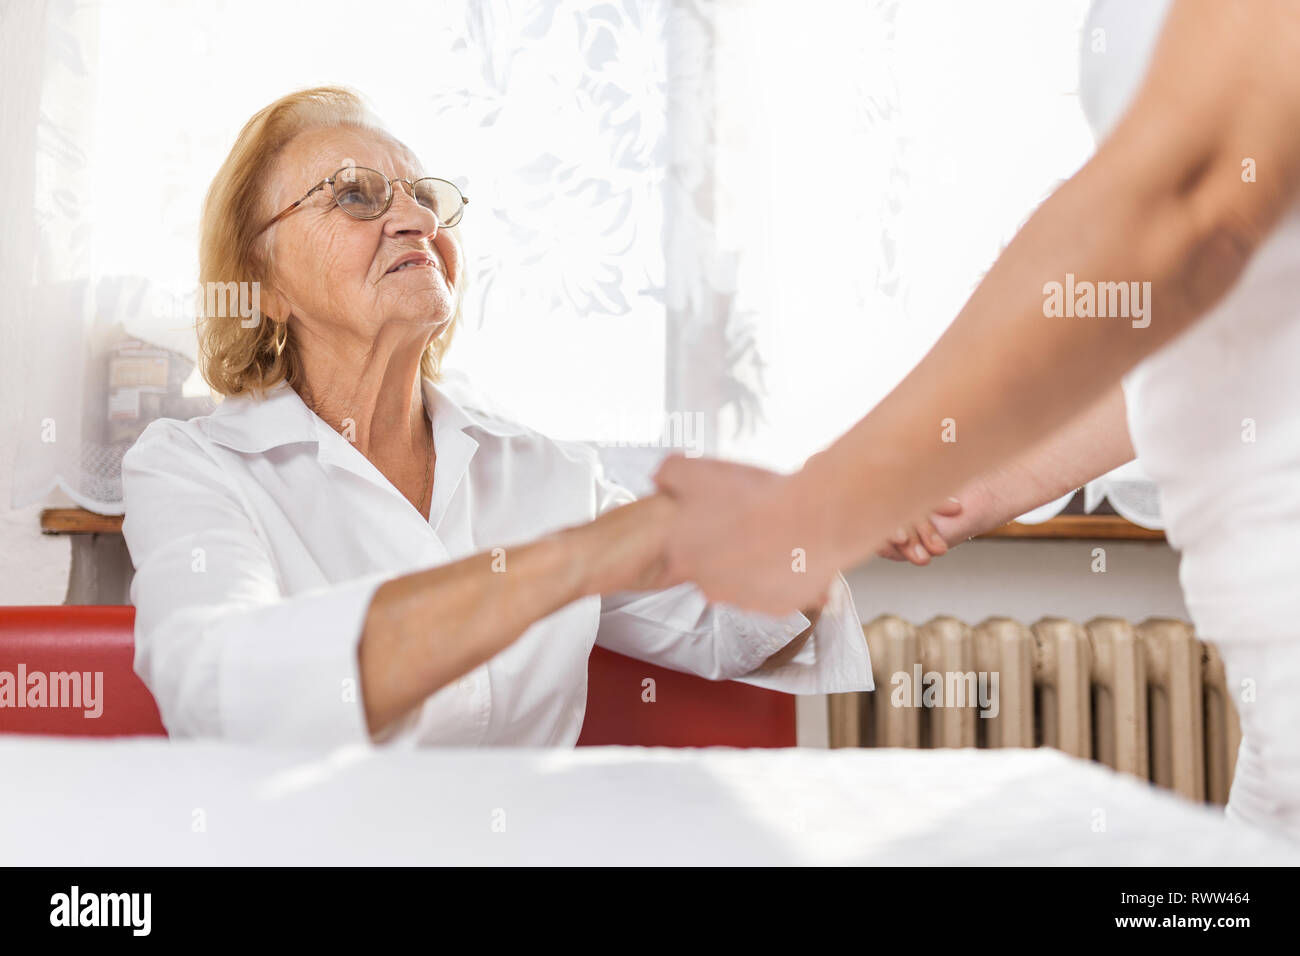 Providing care and support for elderly Stock Photo